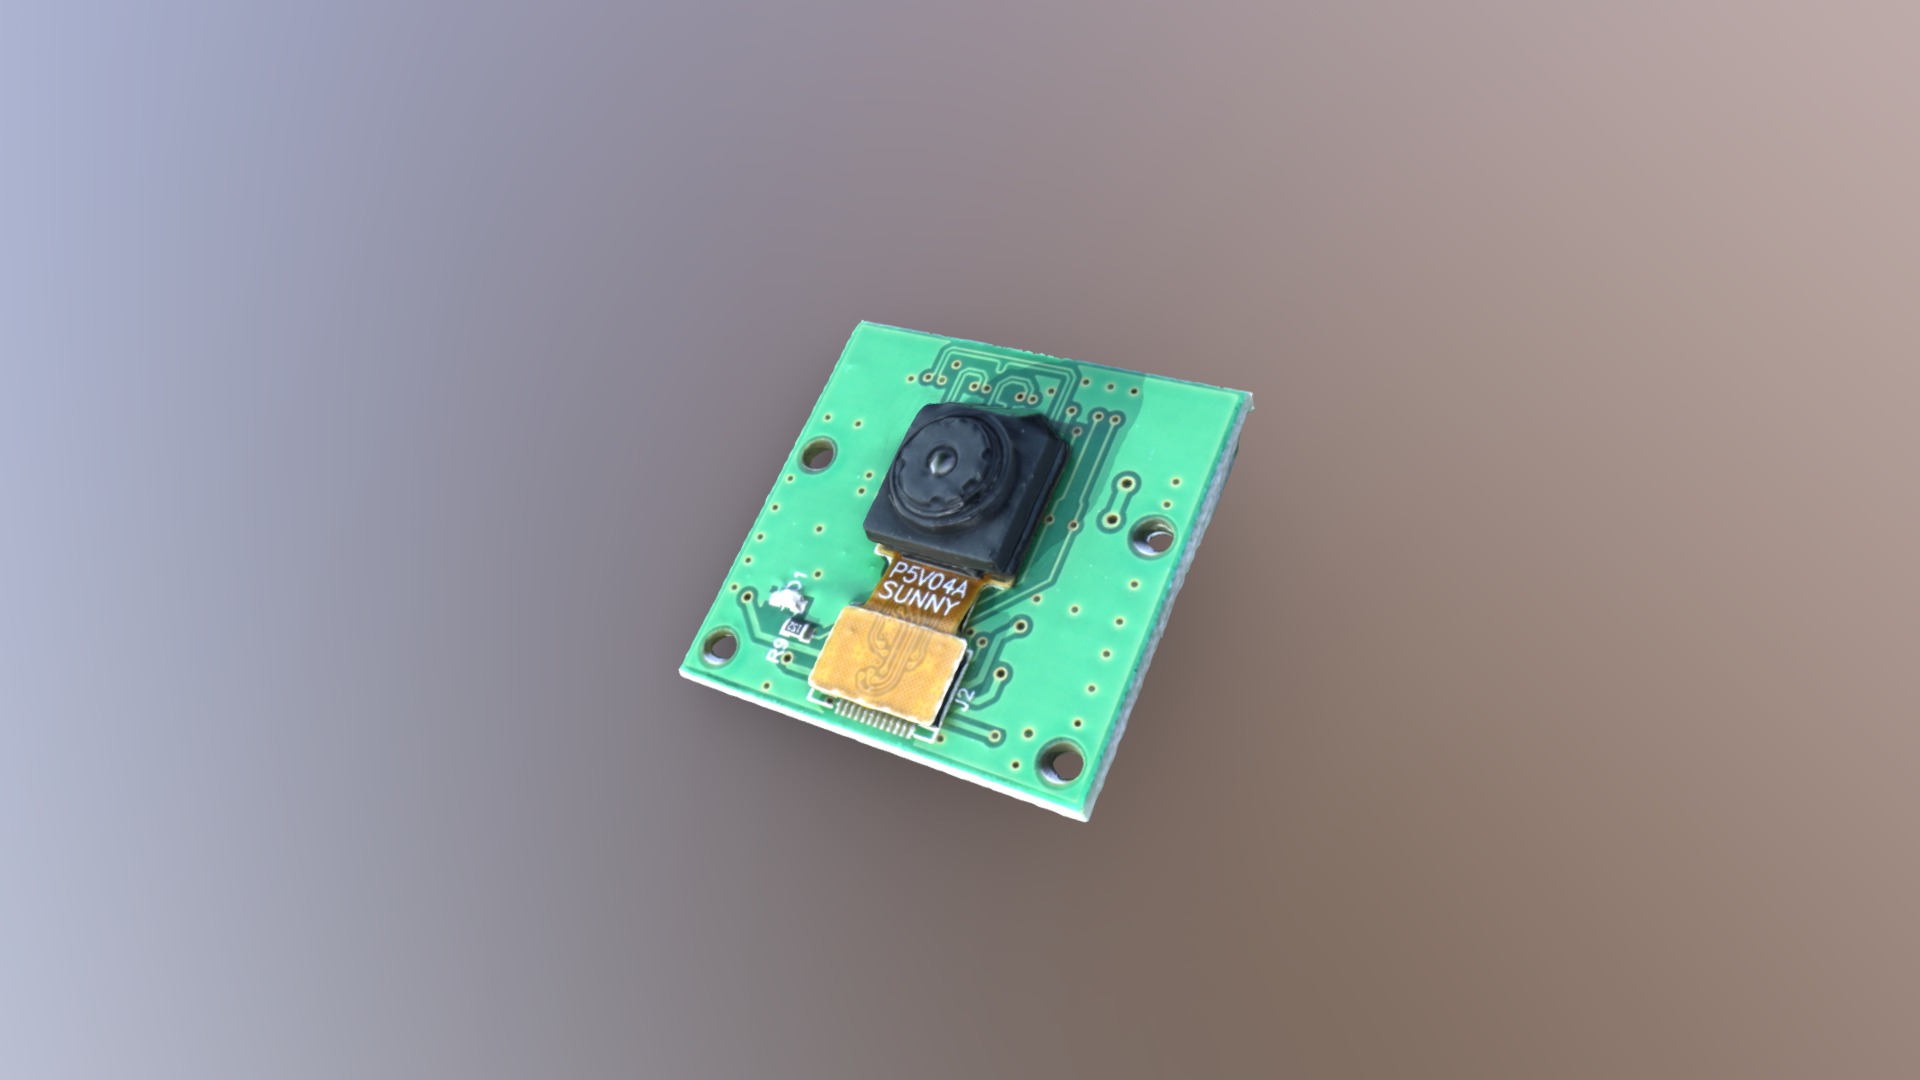 Product Link: https://amzn.to/2L4NegJ


High-Definition video camera for Raspberry Pi Model A or B, B+, model 2, Raspberry Pi 3,3 B+
5MPixel sensor with Omnivision OV5647 sensor in a fixed-focus lens
Integral IR filter
Still picture resolution: 2592 x 1944
Max video resolution: 1080p

Features: 
* Angle of View: 54 x 41 degrees 
* Field of View: 2.0 x 1.33 m at 2 m 
* Full-frame SLR lens equivalent: 35 mm 
* Fixed Focus: 1 m to infinity 
* Max frame rate: 30fps 
* 15 cm flat ribbon cable to 15-pin MIPI Camera Serial Interface (CSI) connector 

Application: 
* Cellular phones, PDAs, Toys 
* Other battery-powered products 
* Can be used in all Raspberry Pi platforms - Arducam 5 Megapixels 1080p Sensor OV5647 - Buy Royalty Free 3D model by AlphaR Team (@AlpharBrands) 3d model